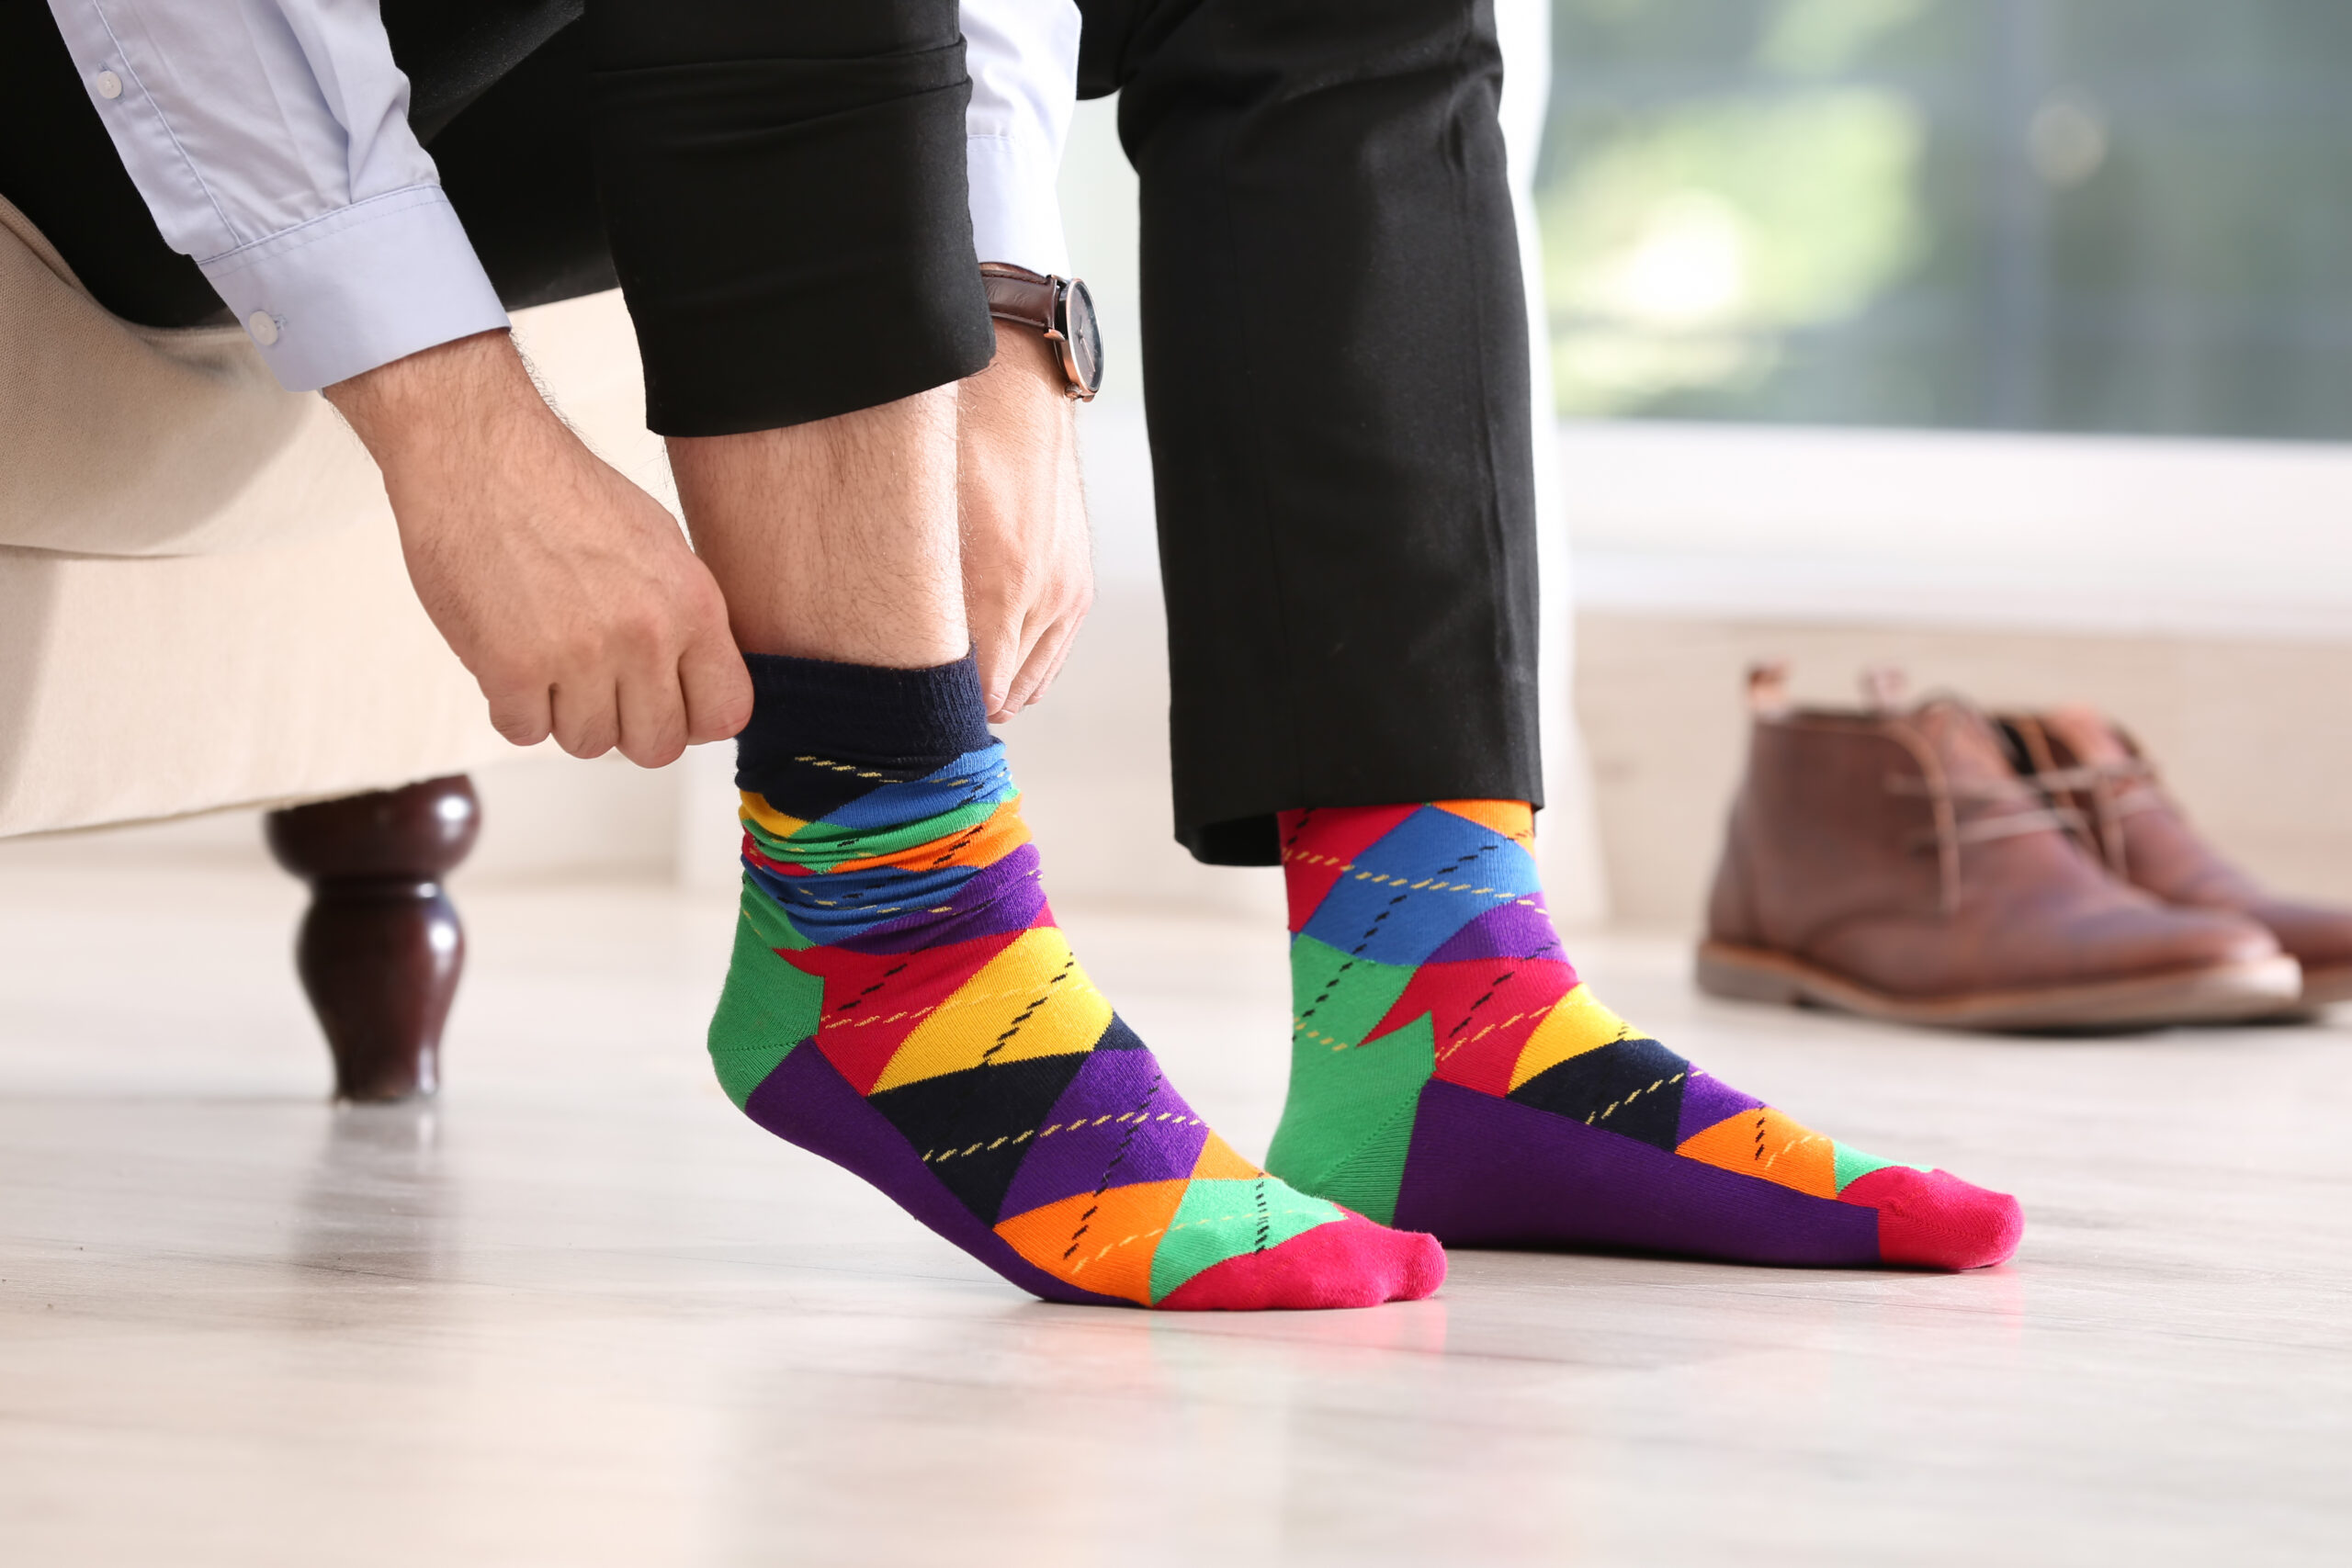 https://shoefresh.com/wp-content/uploads/2021/11/Socks-or-No-Socks-Does-Either-Contribute-to-Stinky-Shoes-scaled.jpeg